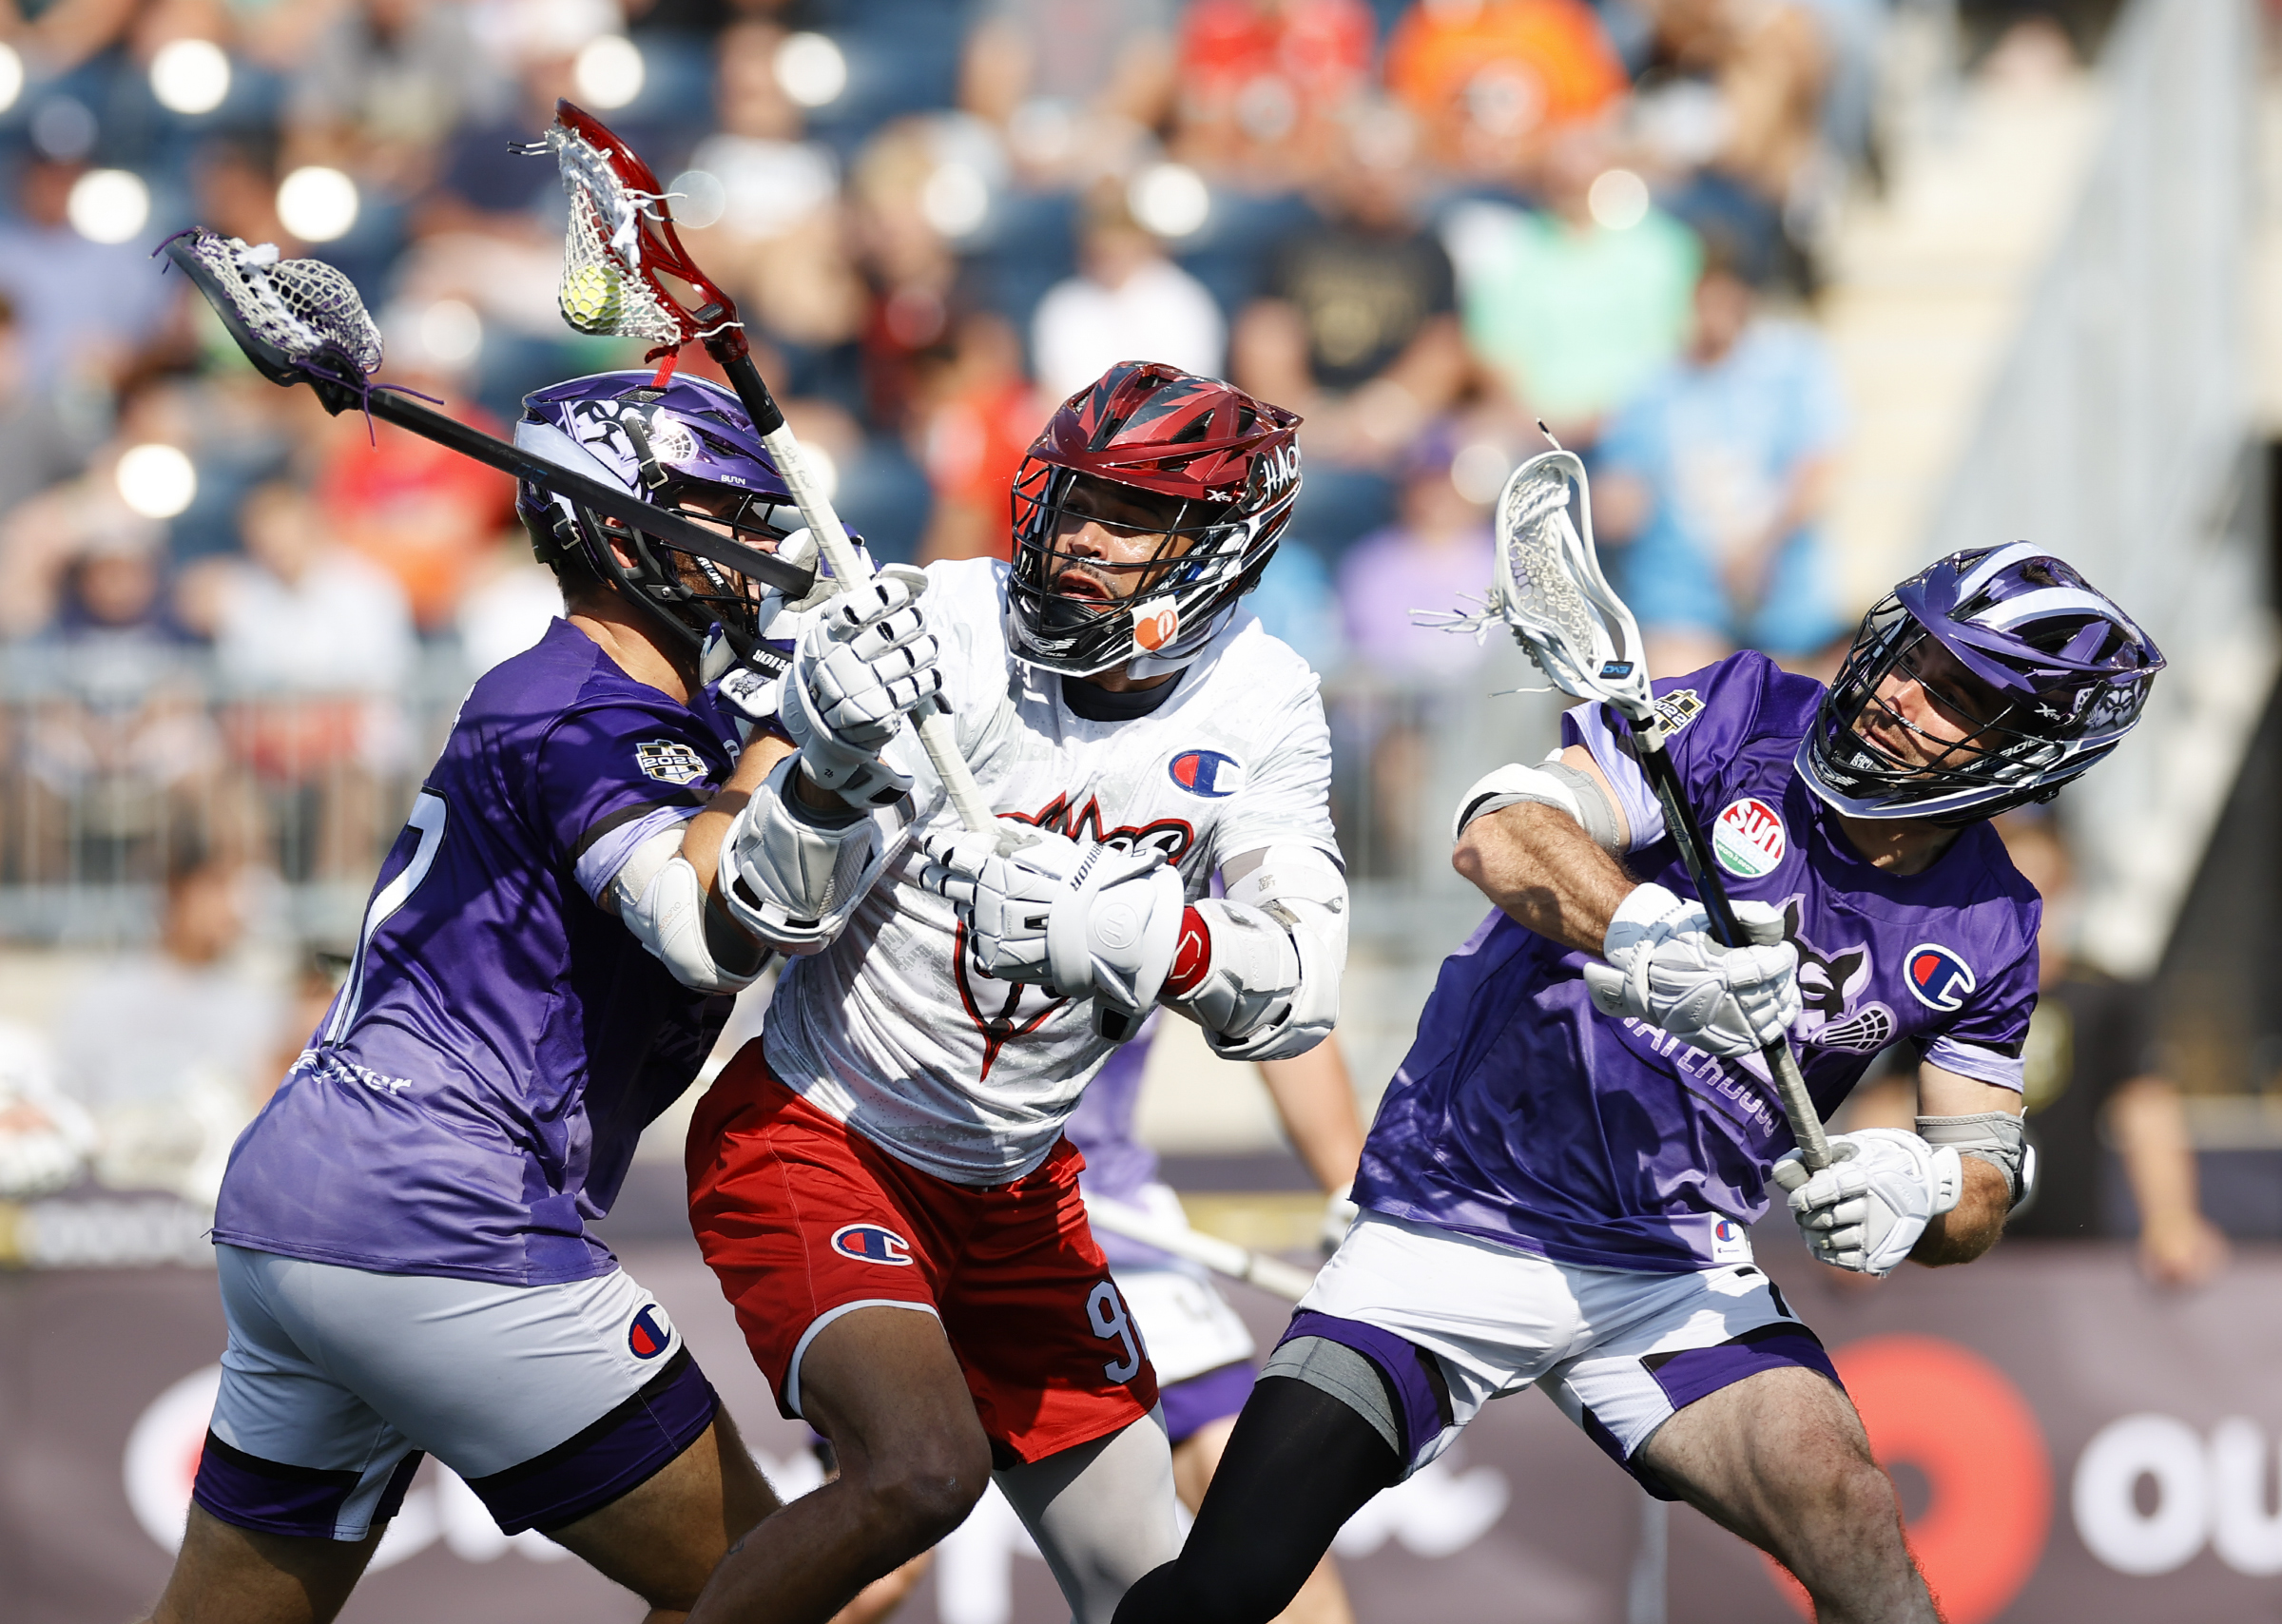 PLL Notebook: Cannons Clinch Final Playoff Spot, Waterdogs at No. 1